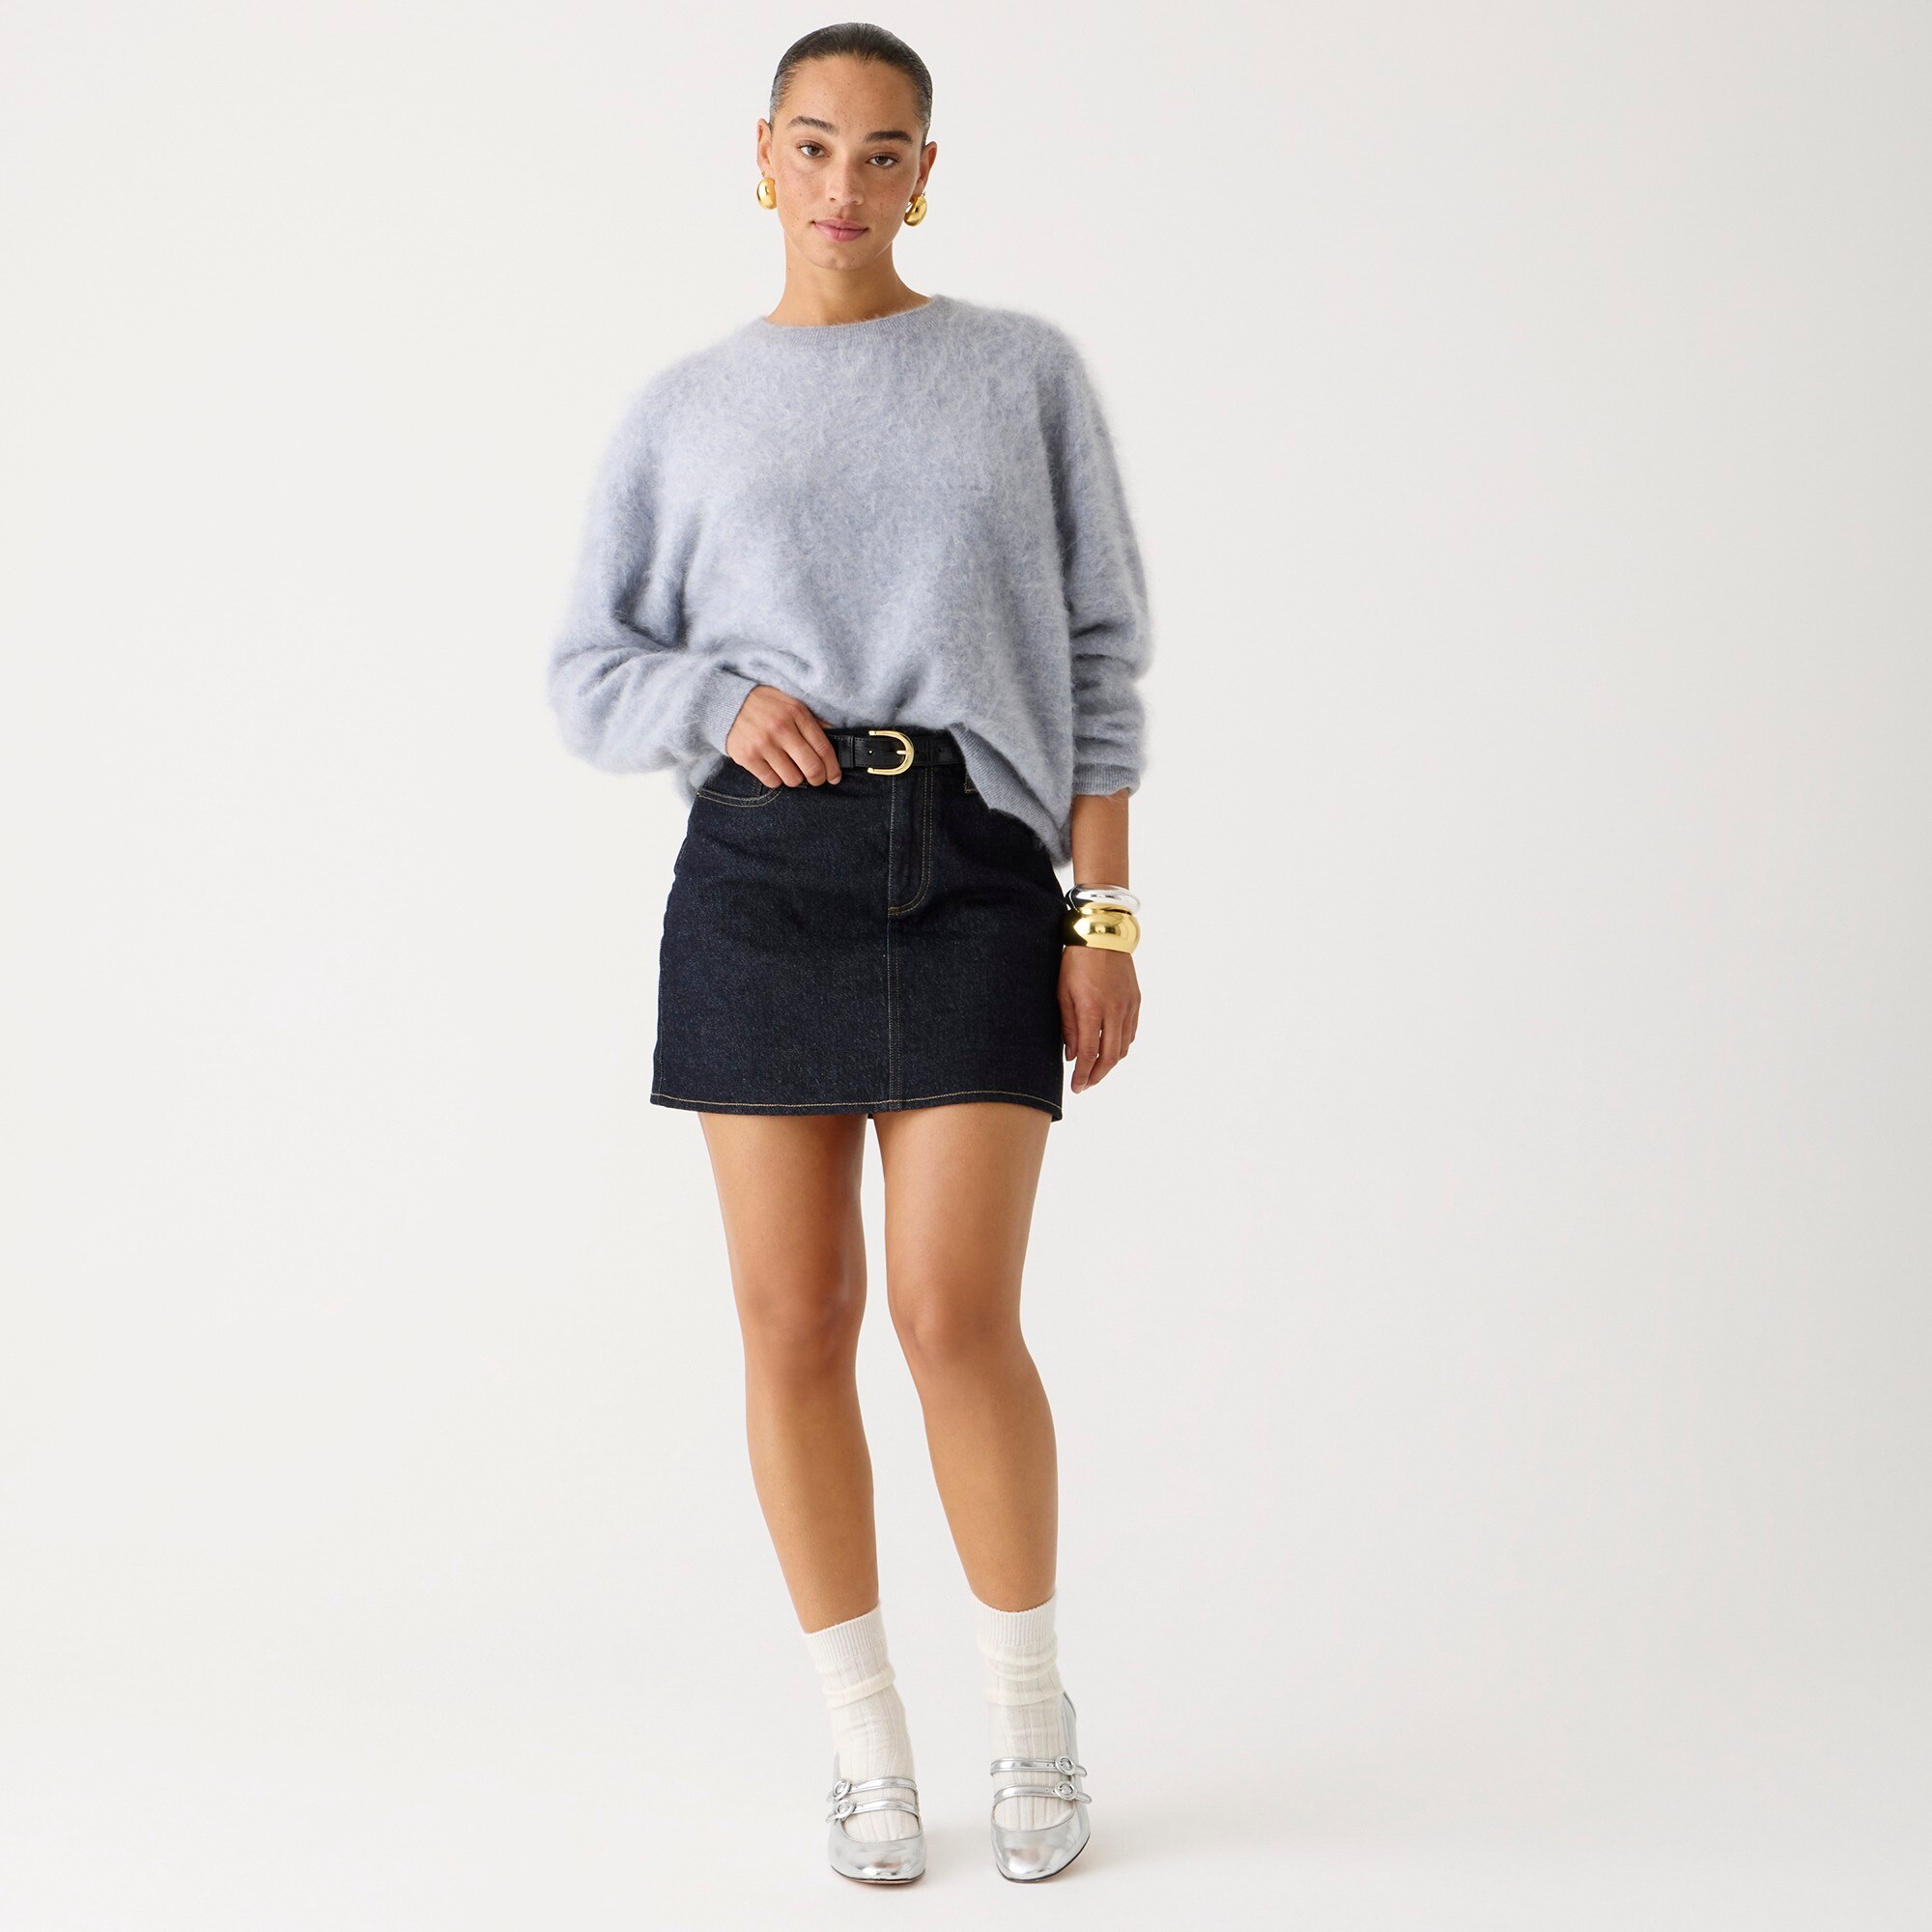  Brushed cashmere relaxed crewneck sweater